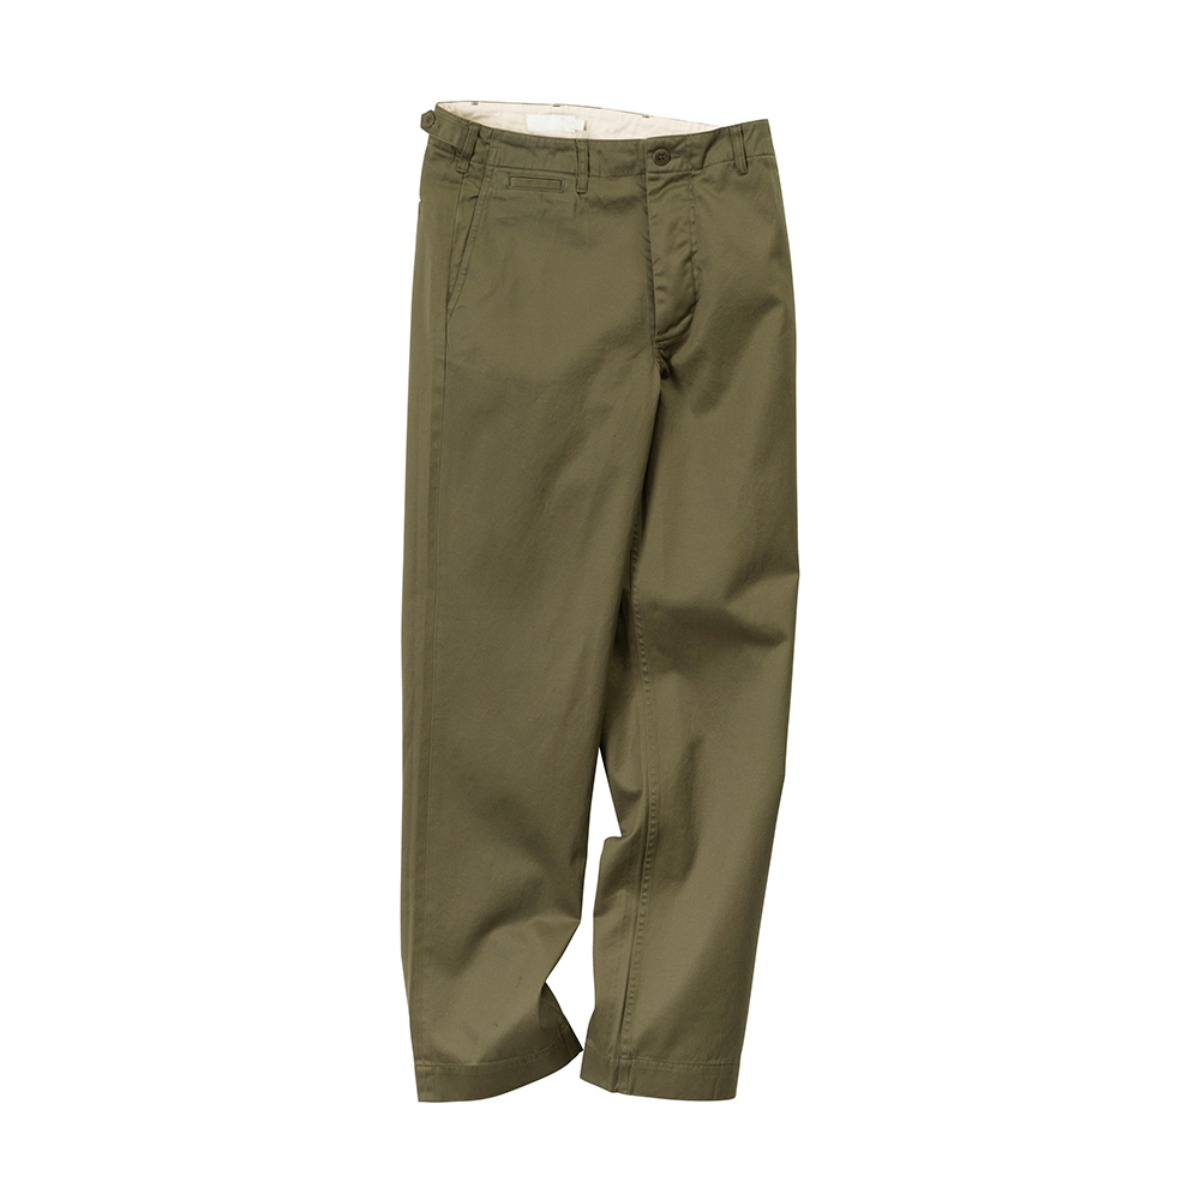  VTG FLAT FRONT OFFICER CHINO OLIVE DRAB